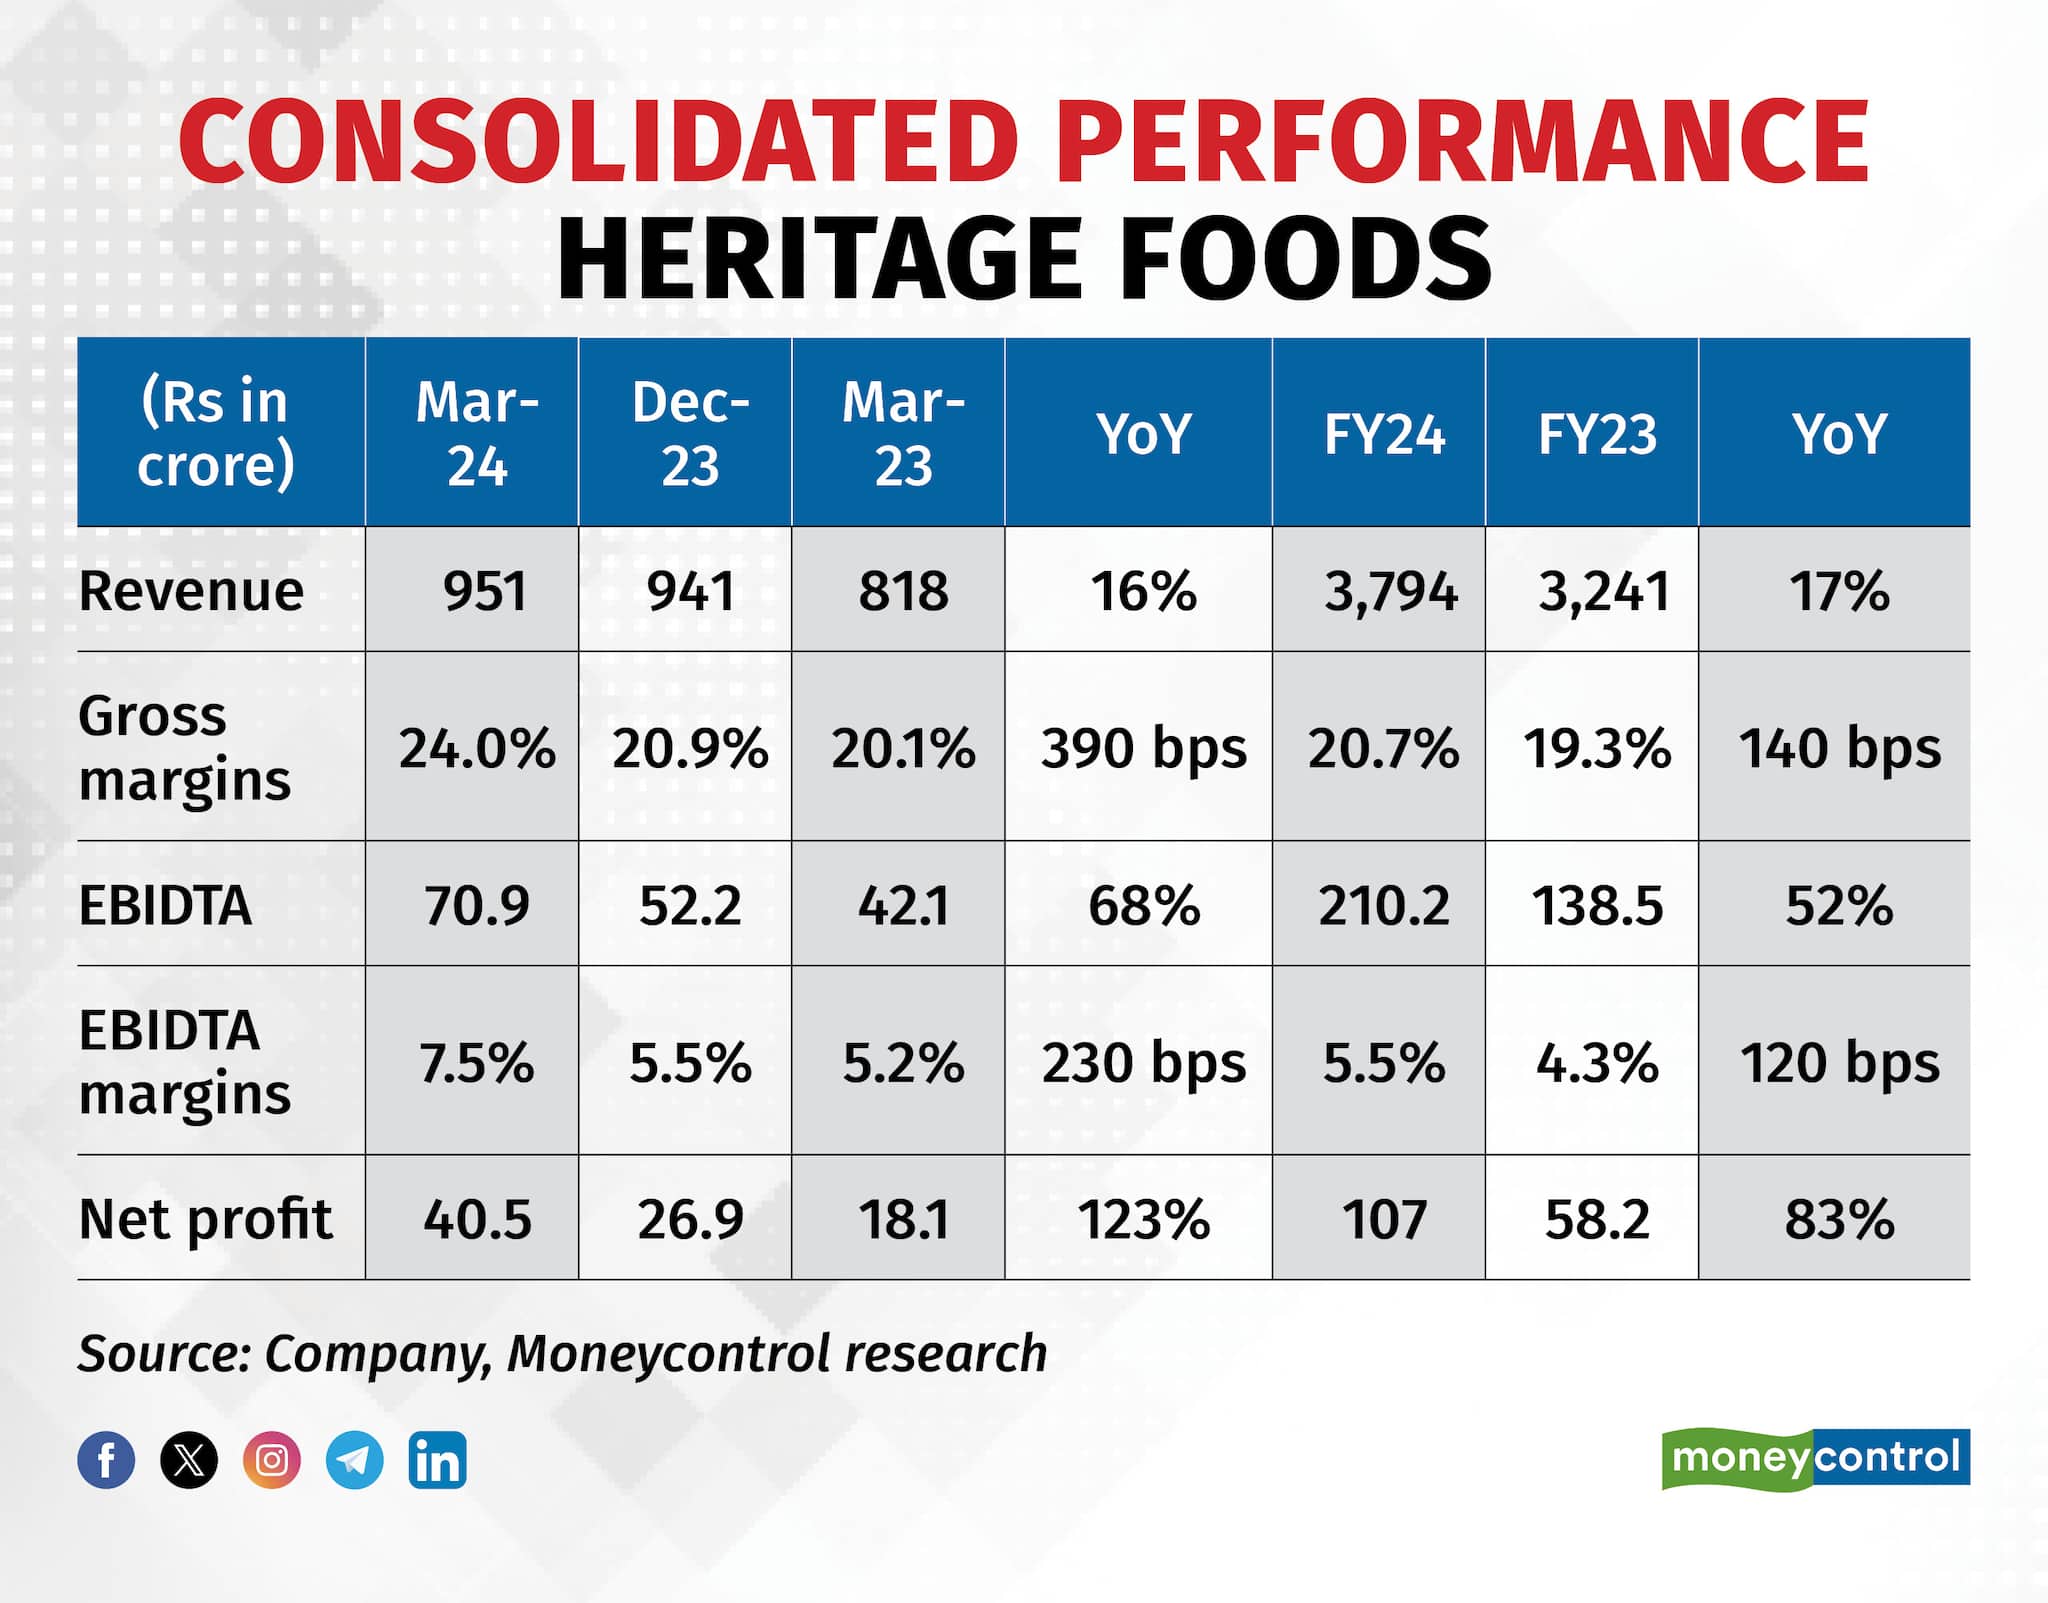 Consolidated performance